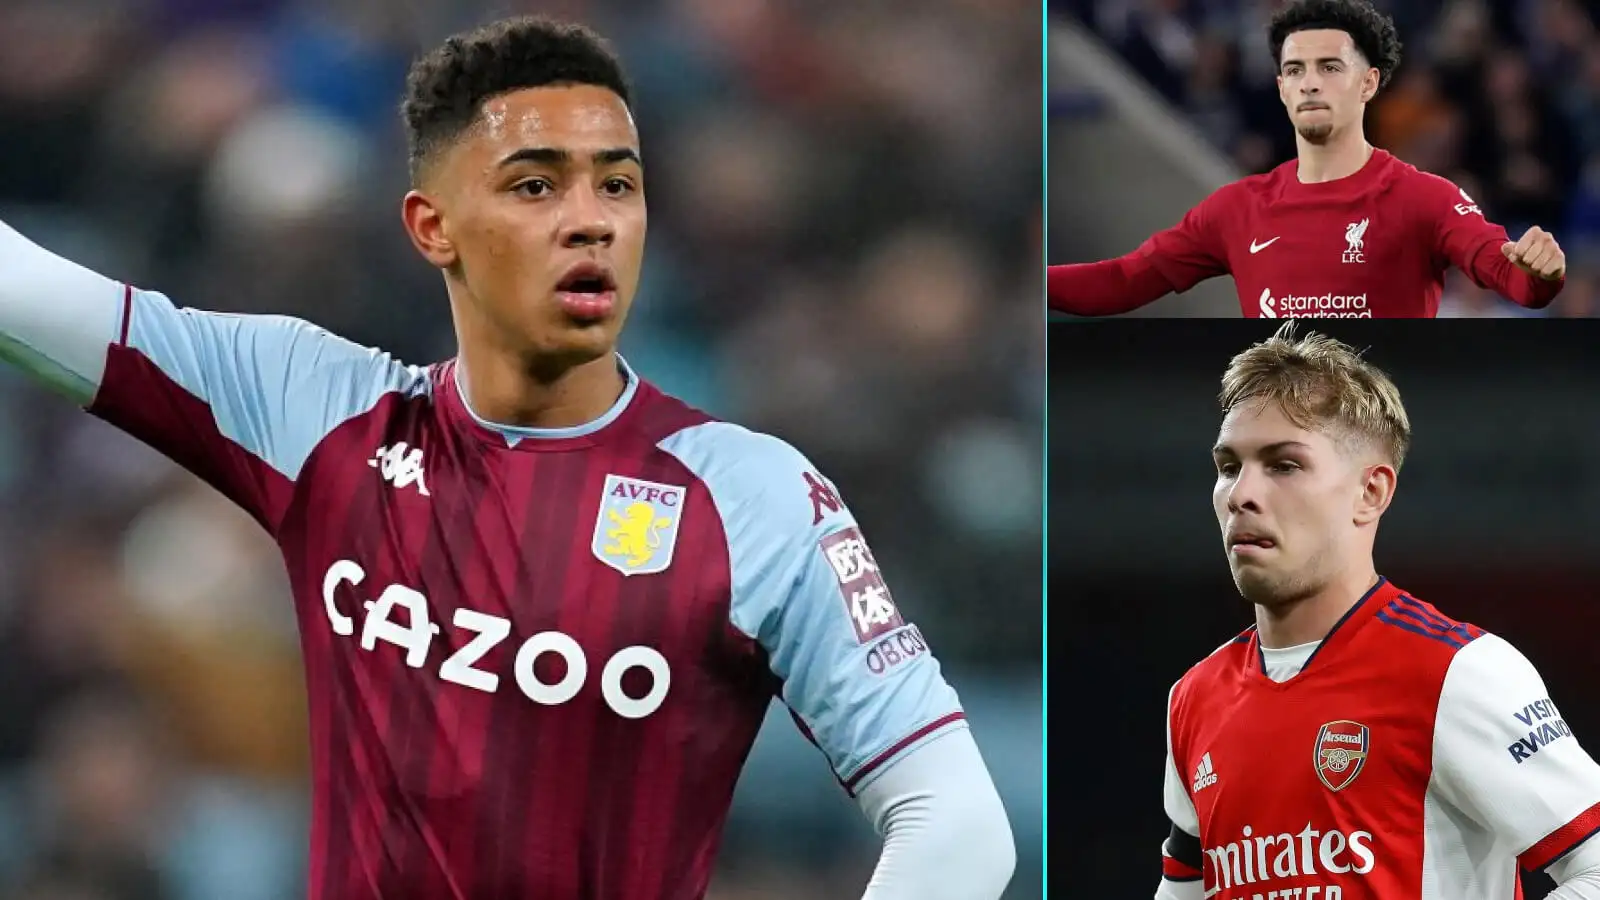 Jacob Ramsey, Curtis Jones and Emile Smith Rowe are among the England U21 stars pushing for a place at Euro 2024.